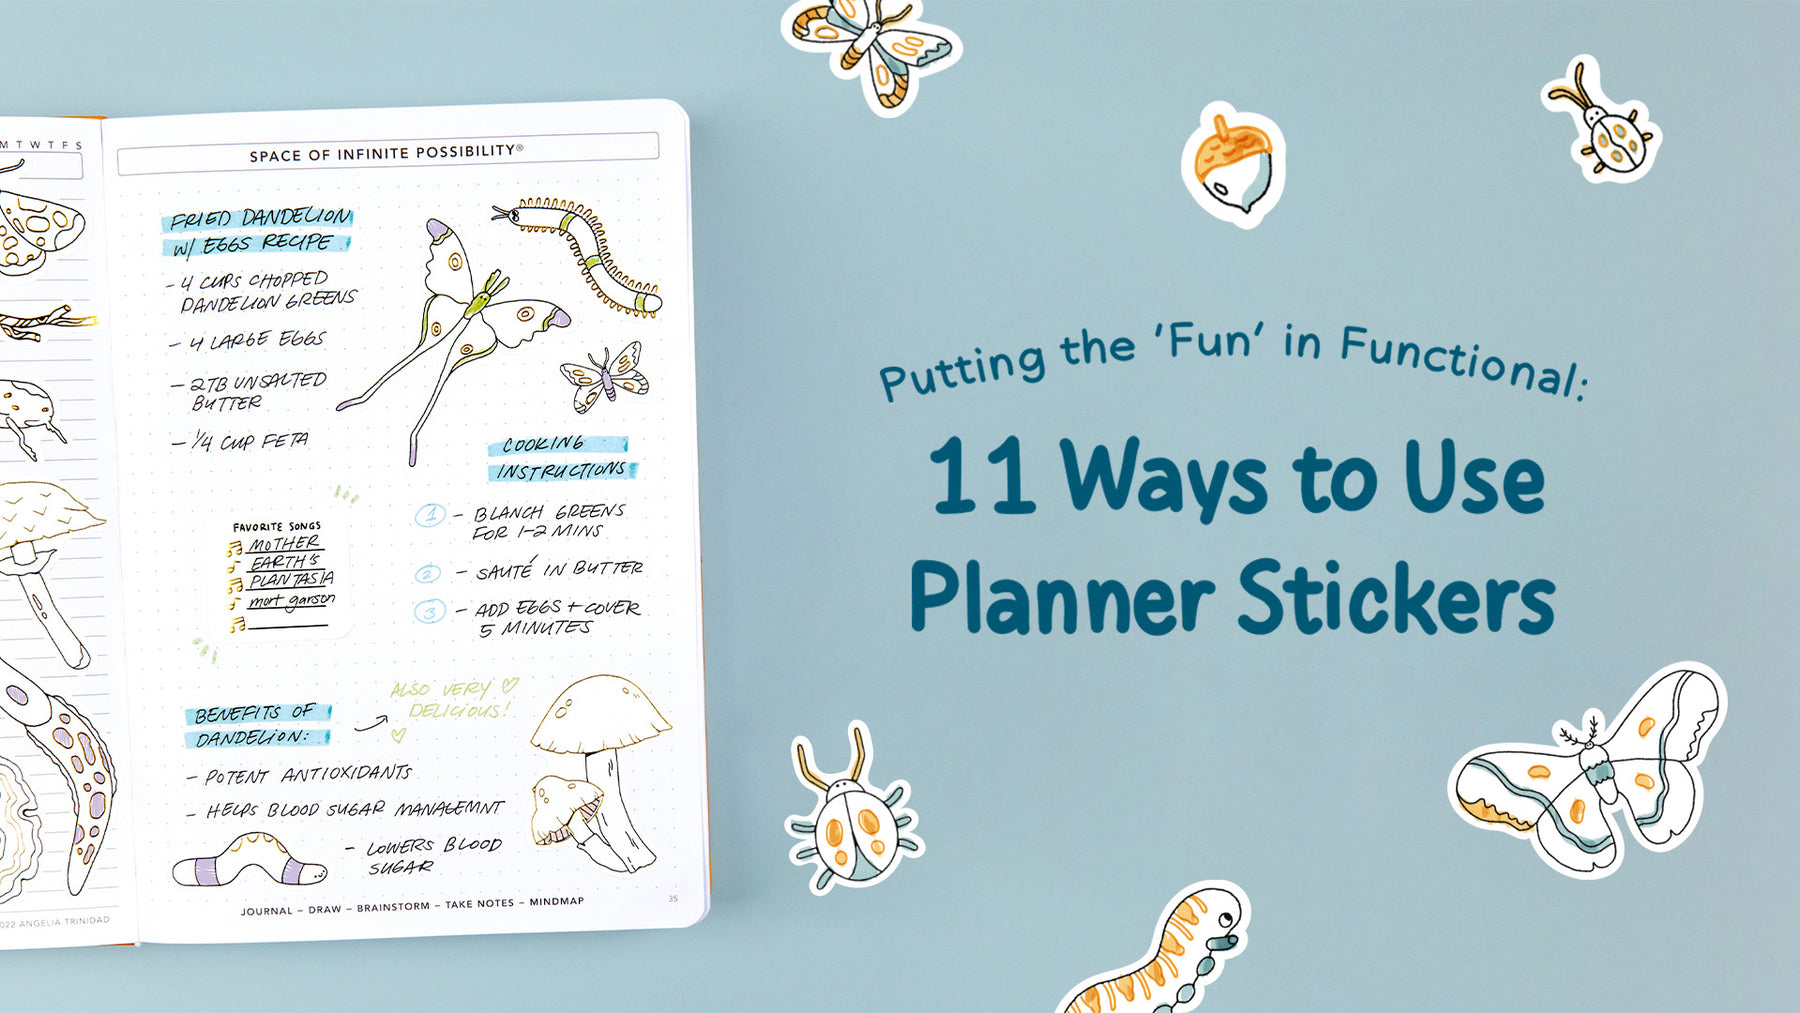 Putting the “Fun” in Functional: 11 Ways to Use Planner Stickers